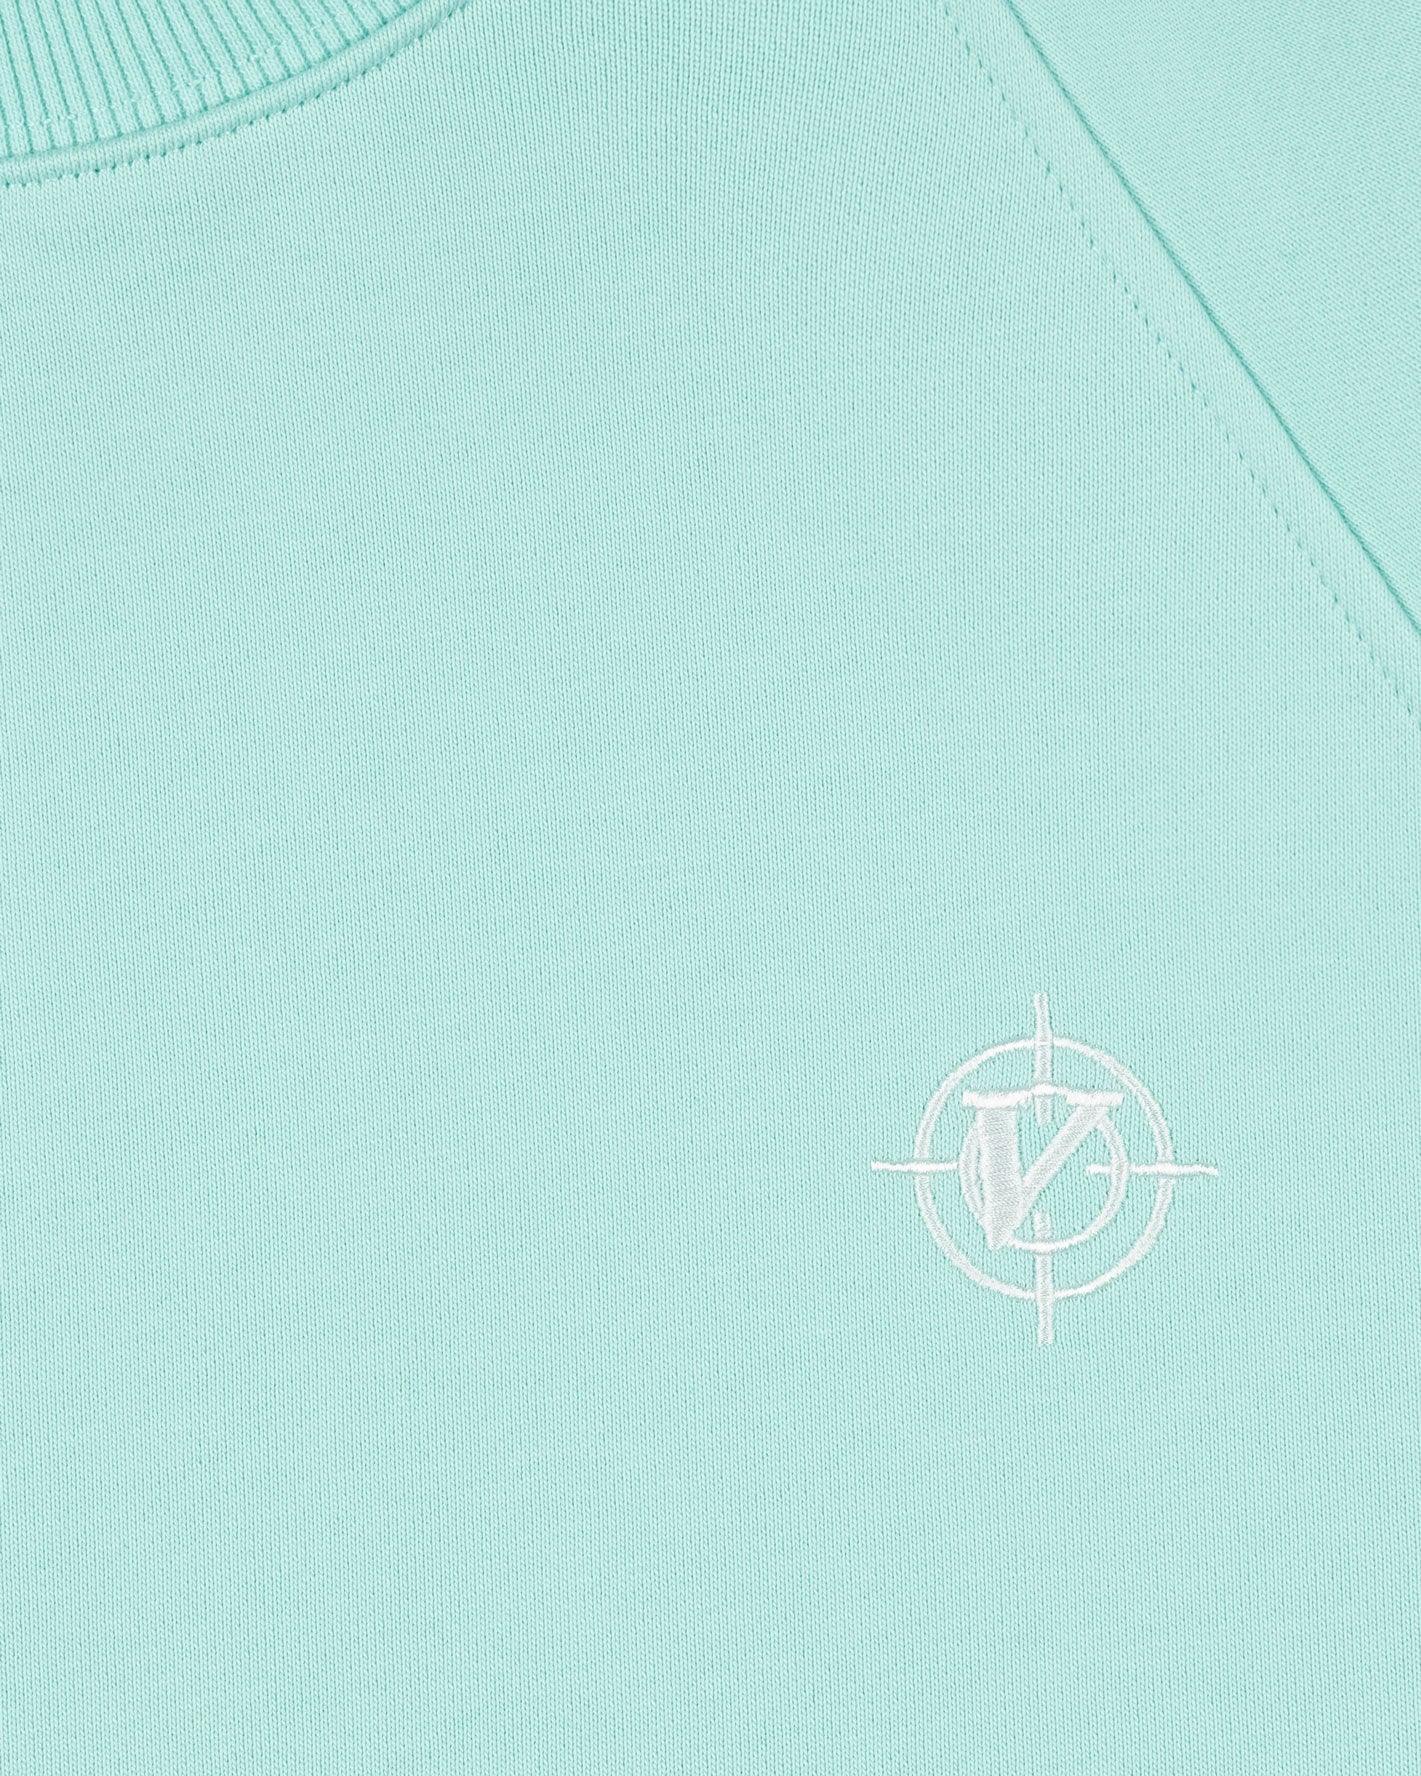 INSIDE OUT HOODIE TURQUOISE - VICINITY